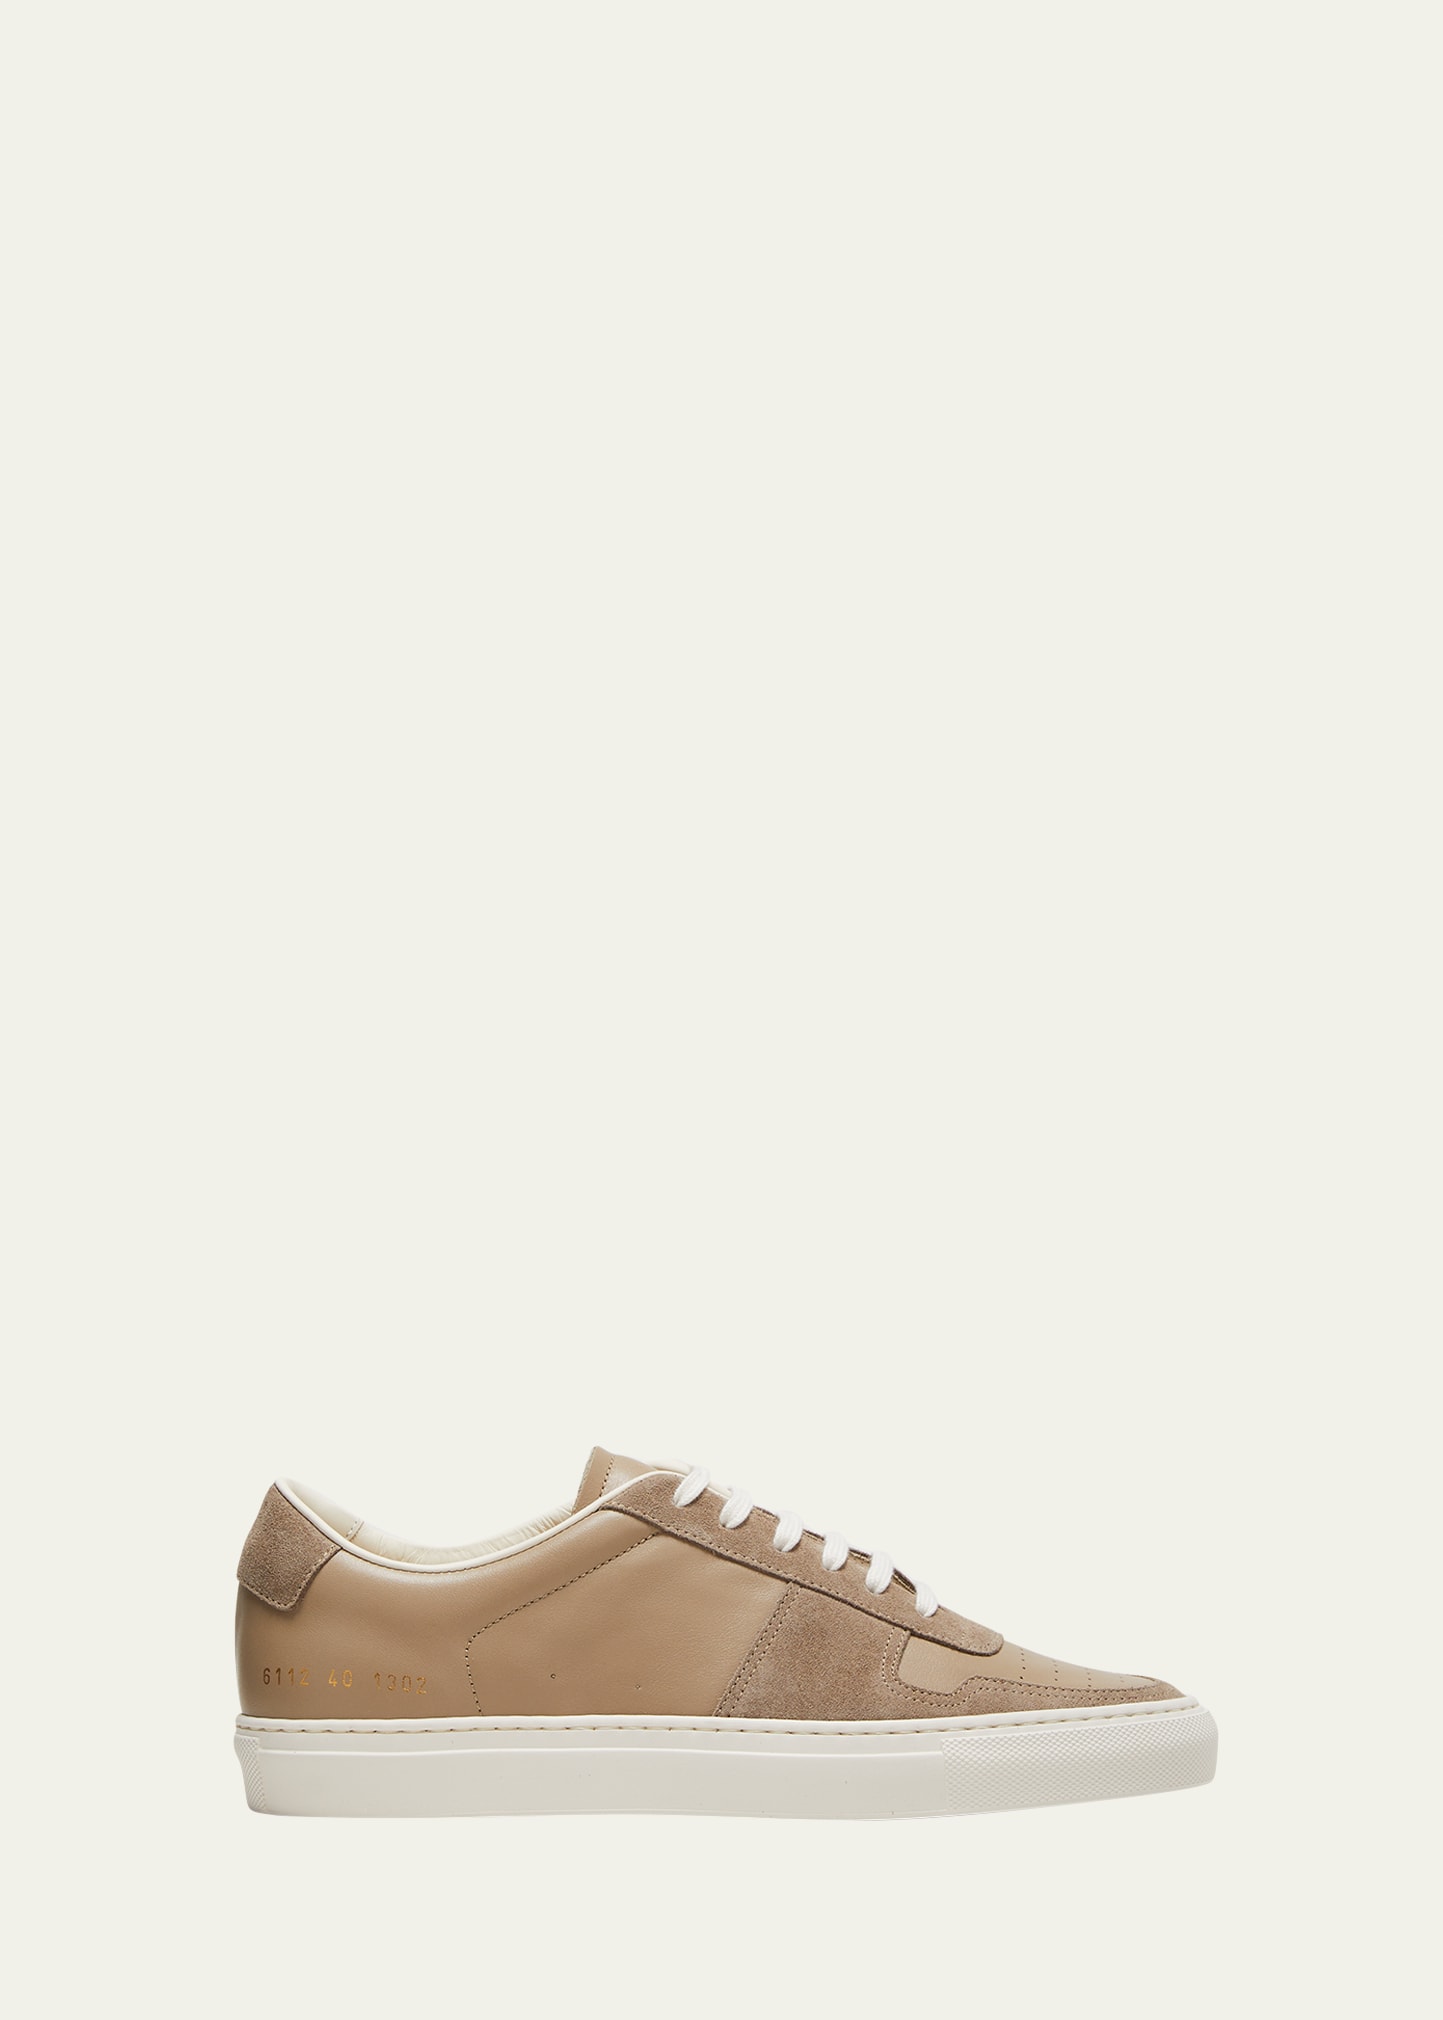 Common Projects Bball Summer Mixed Leather Court Sneakers In Tan